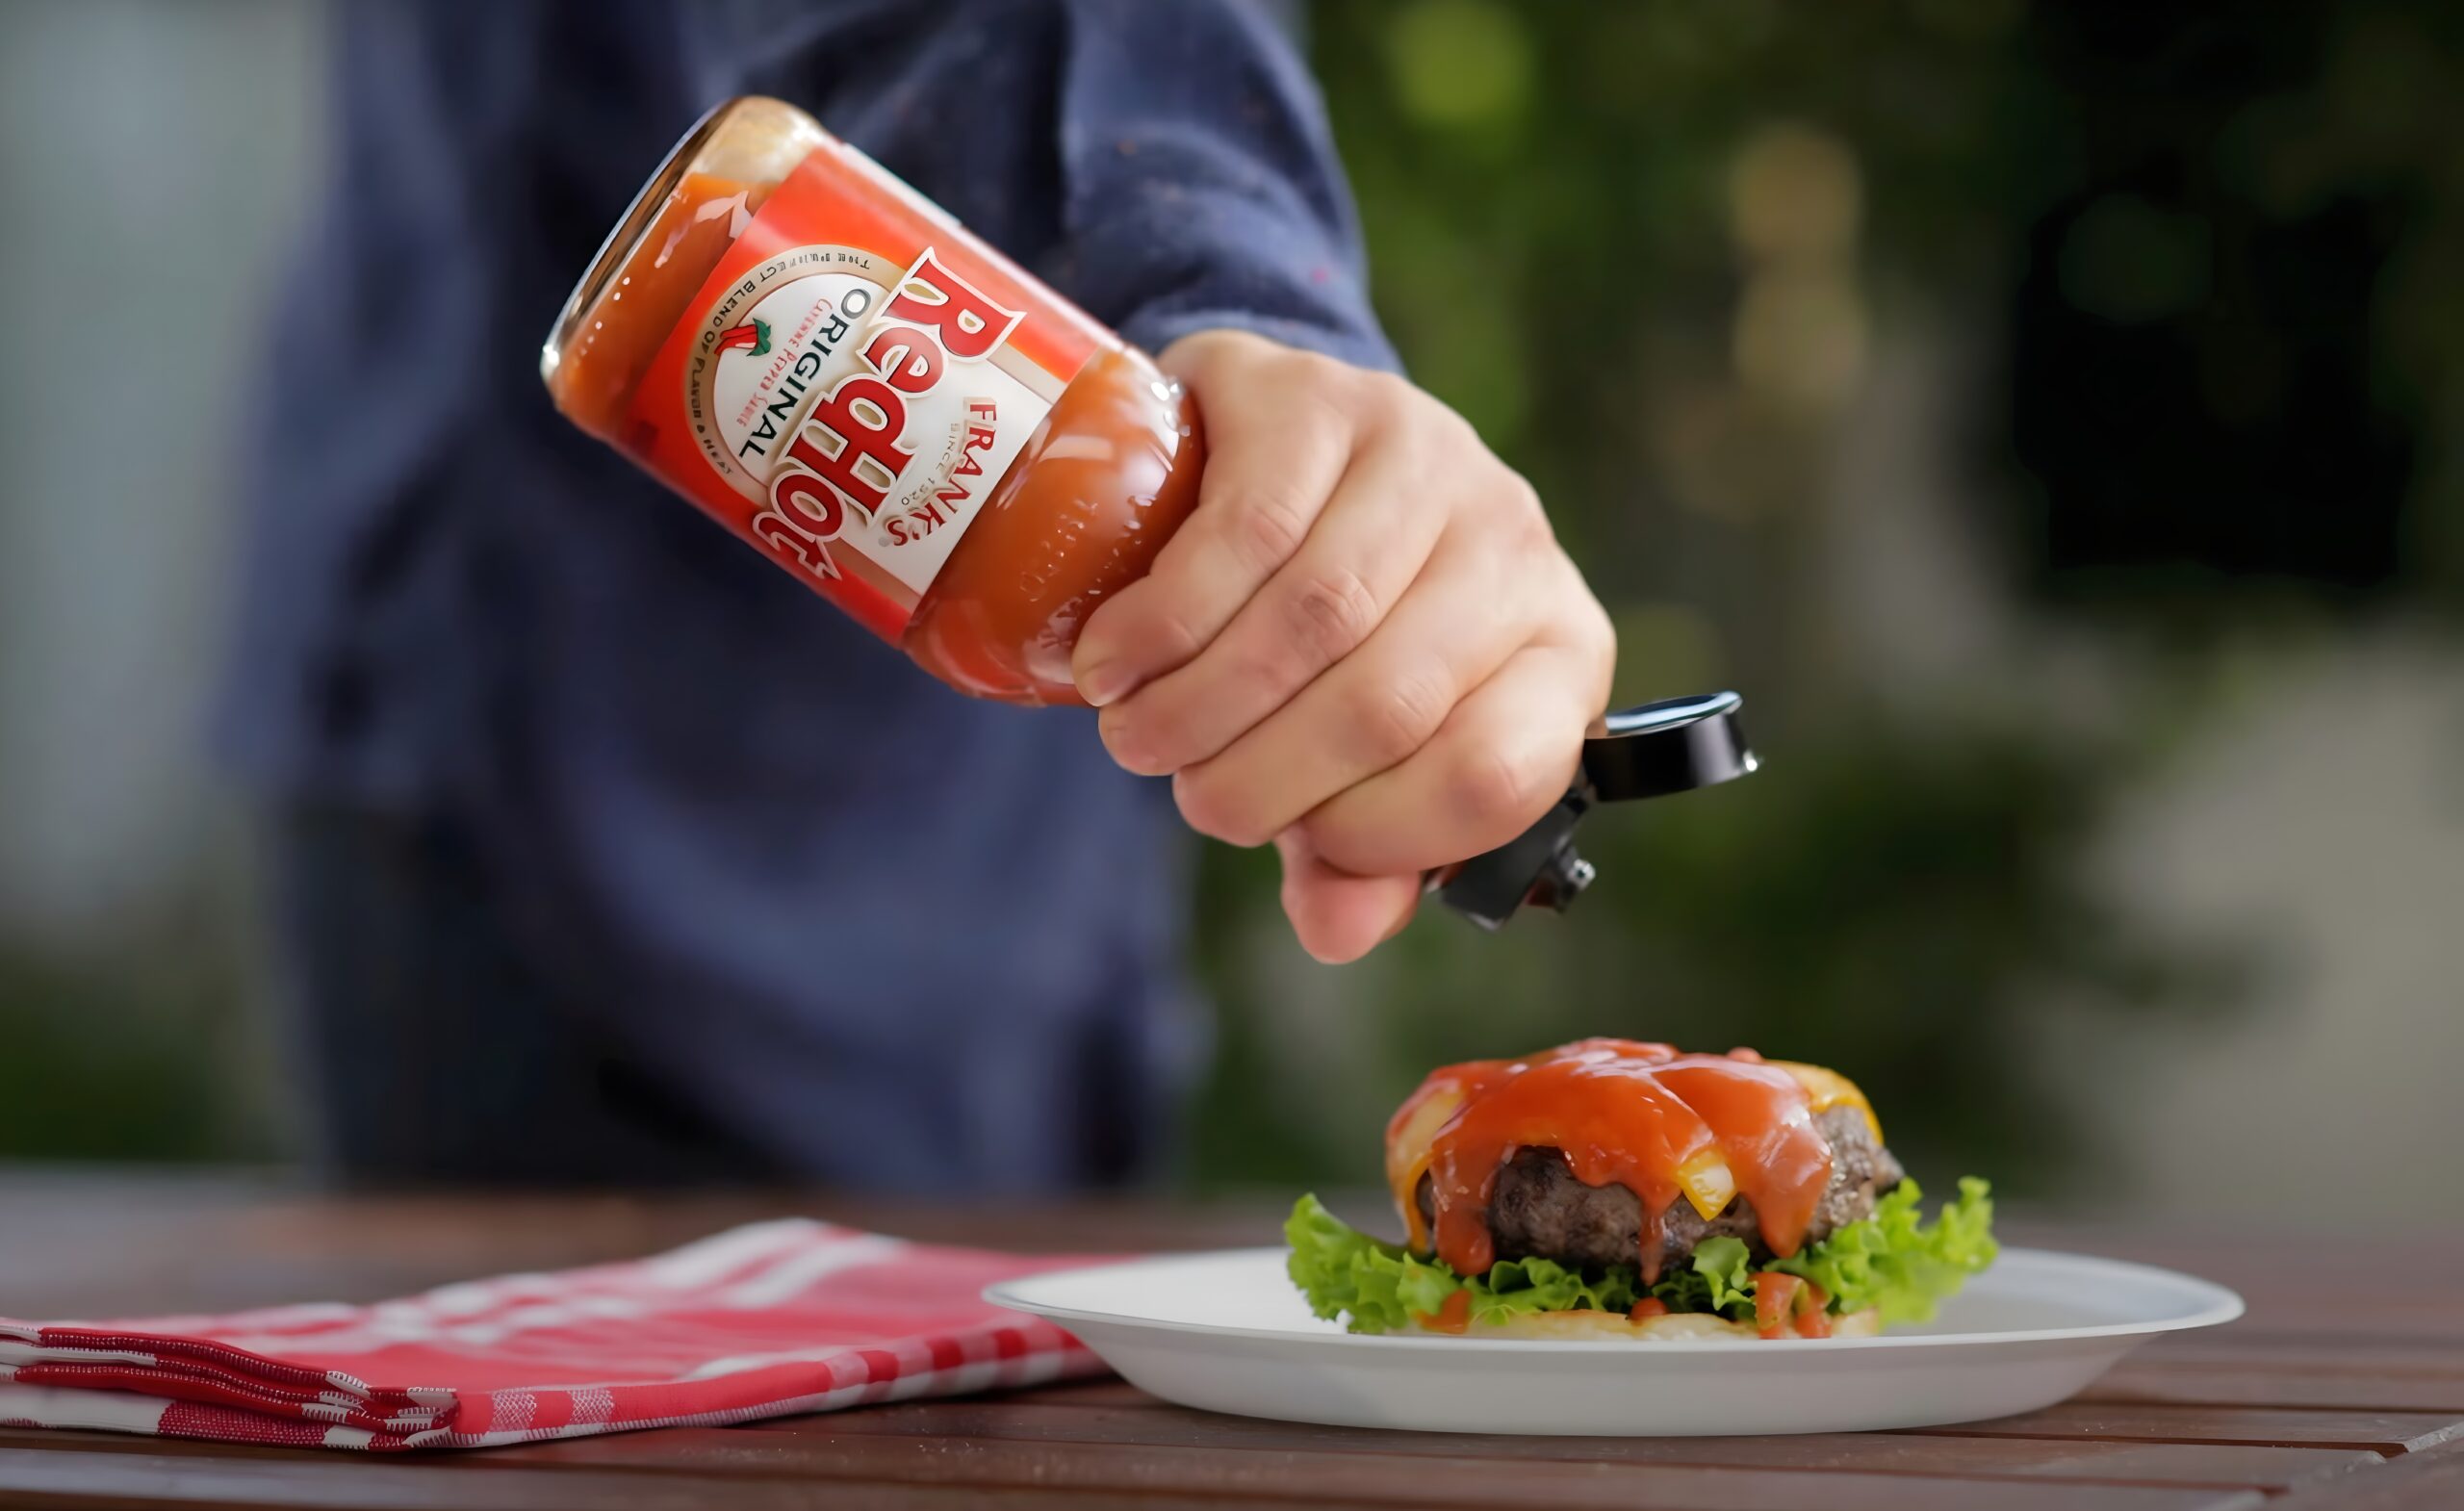 A person is putting sauce on a burger.